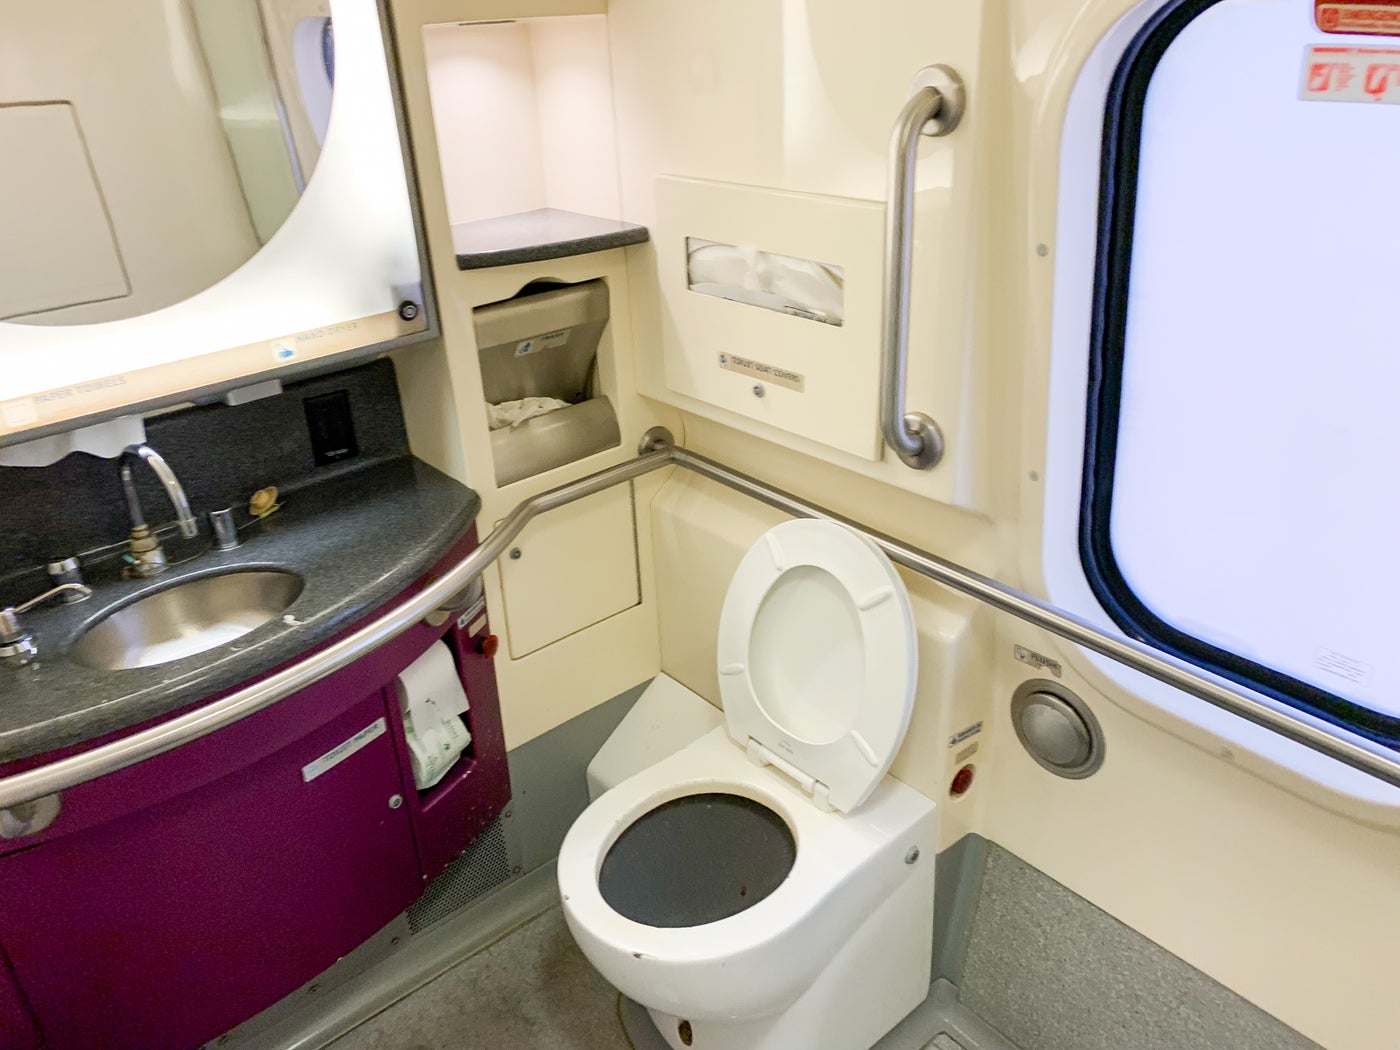 A Review Of Amtraks Acela Express In First Class